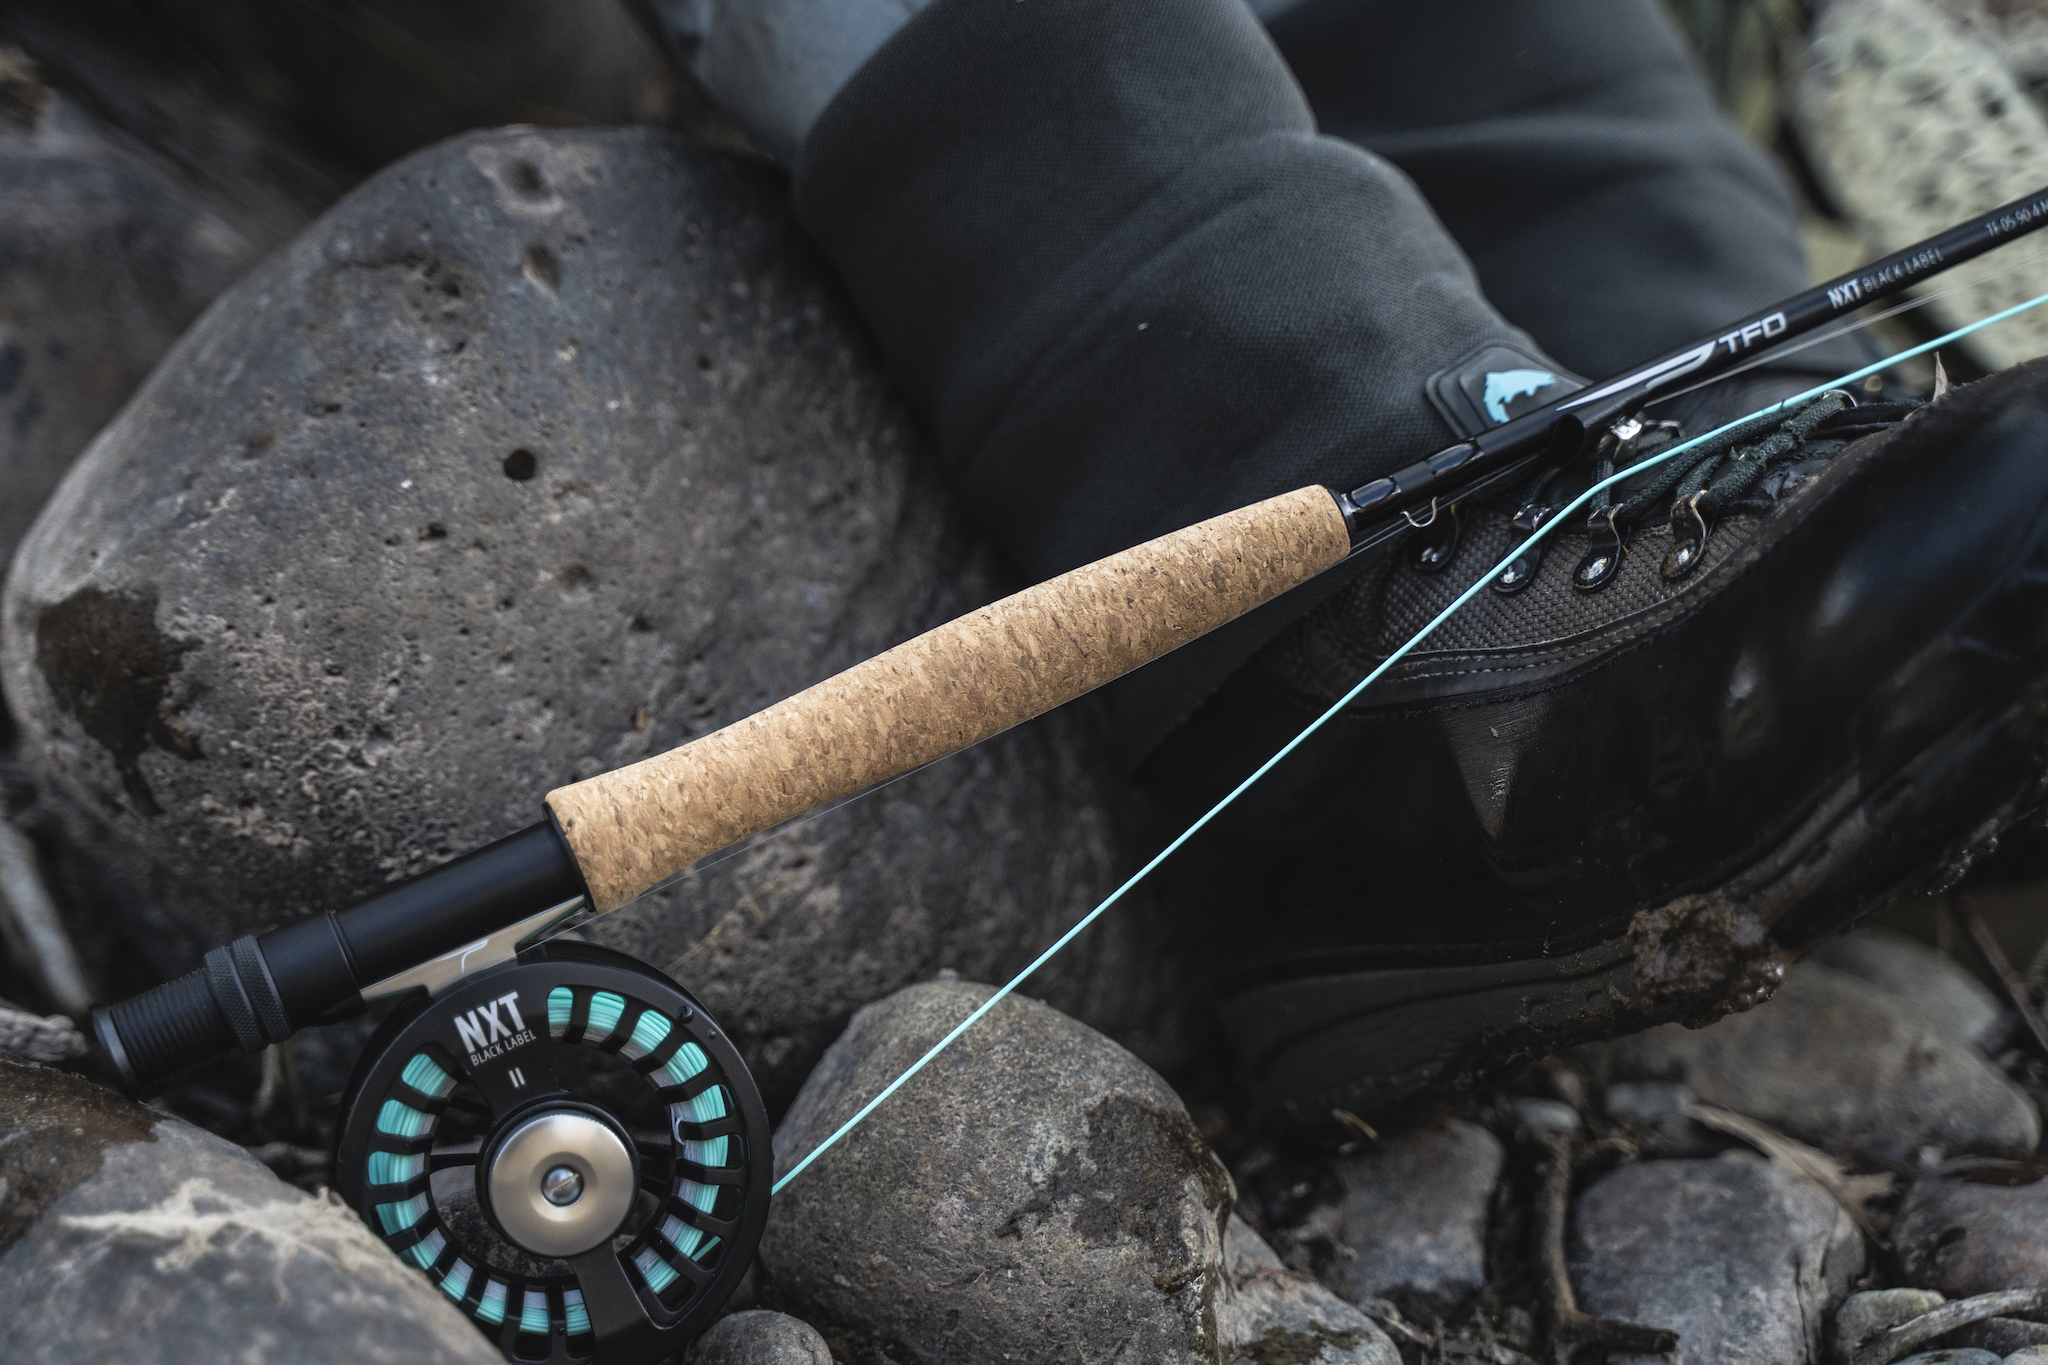 NXT Black Label Reel - Temple Fork Outfitters